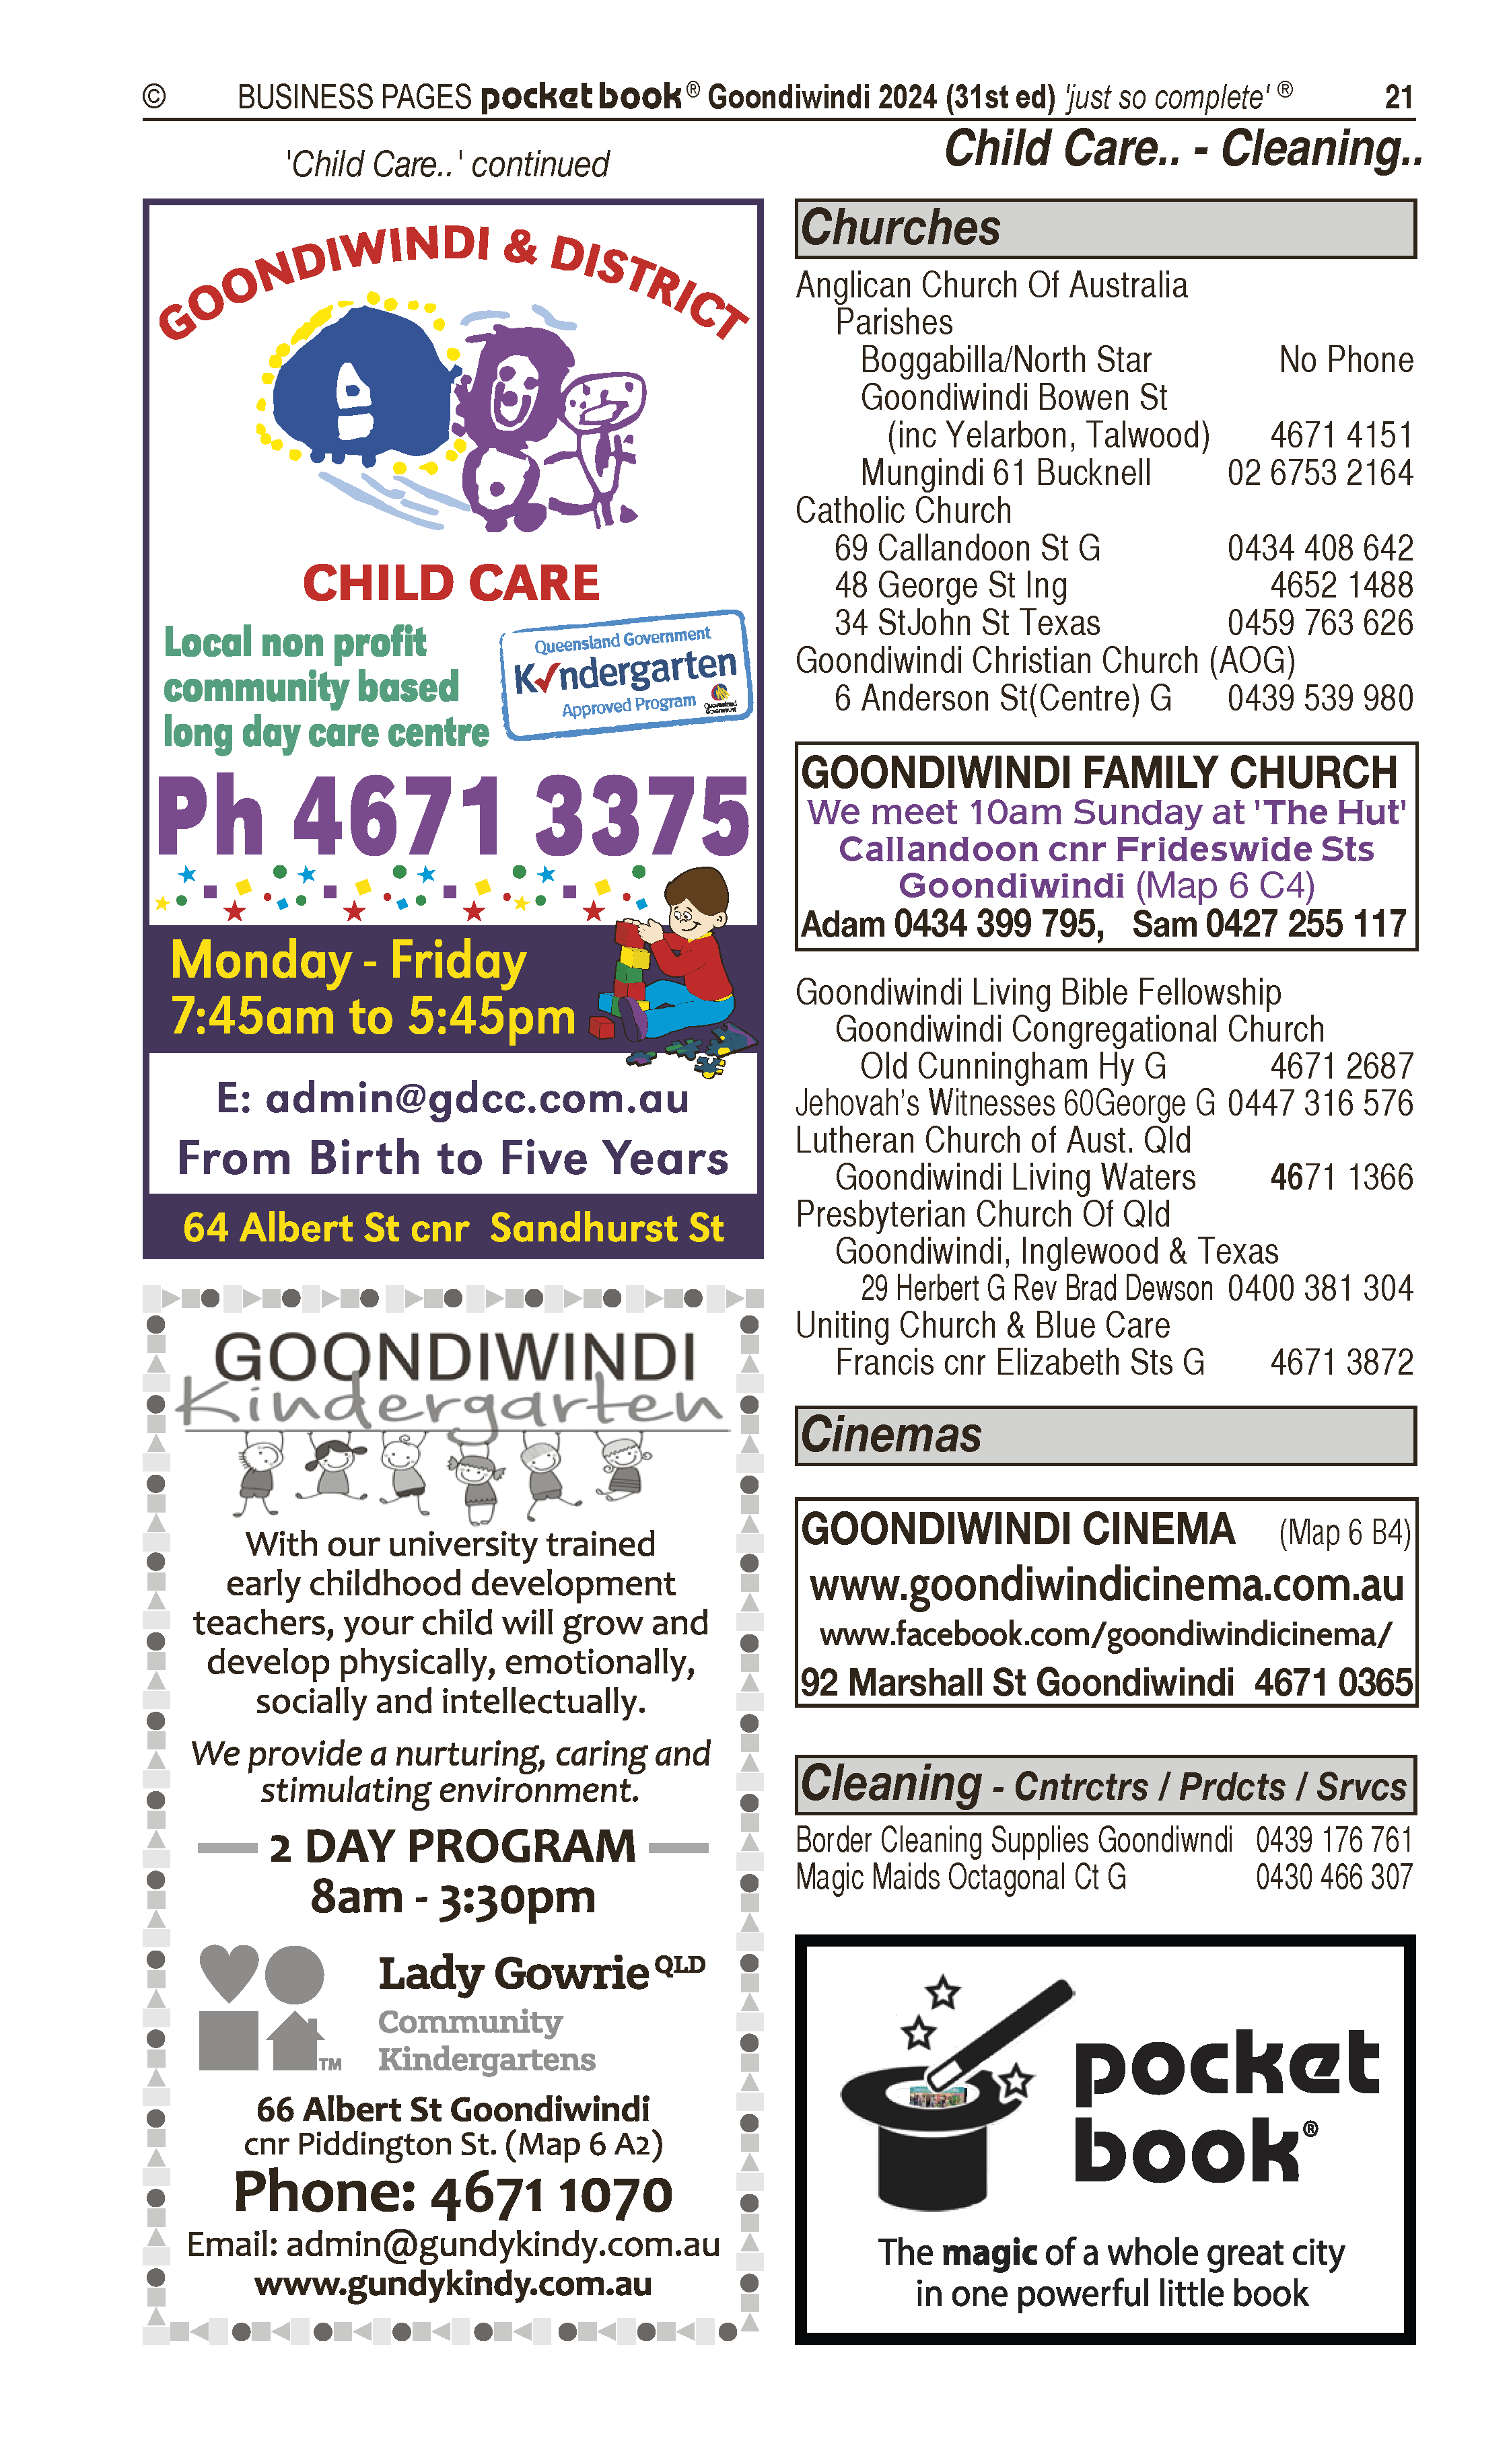 Lutheran Church of Aust. Qld | Churches in Goondiwindi | PBezy Pocket Books local directories - page 21